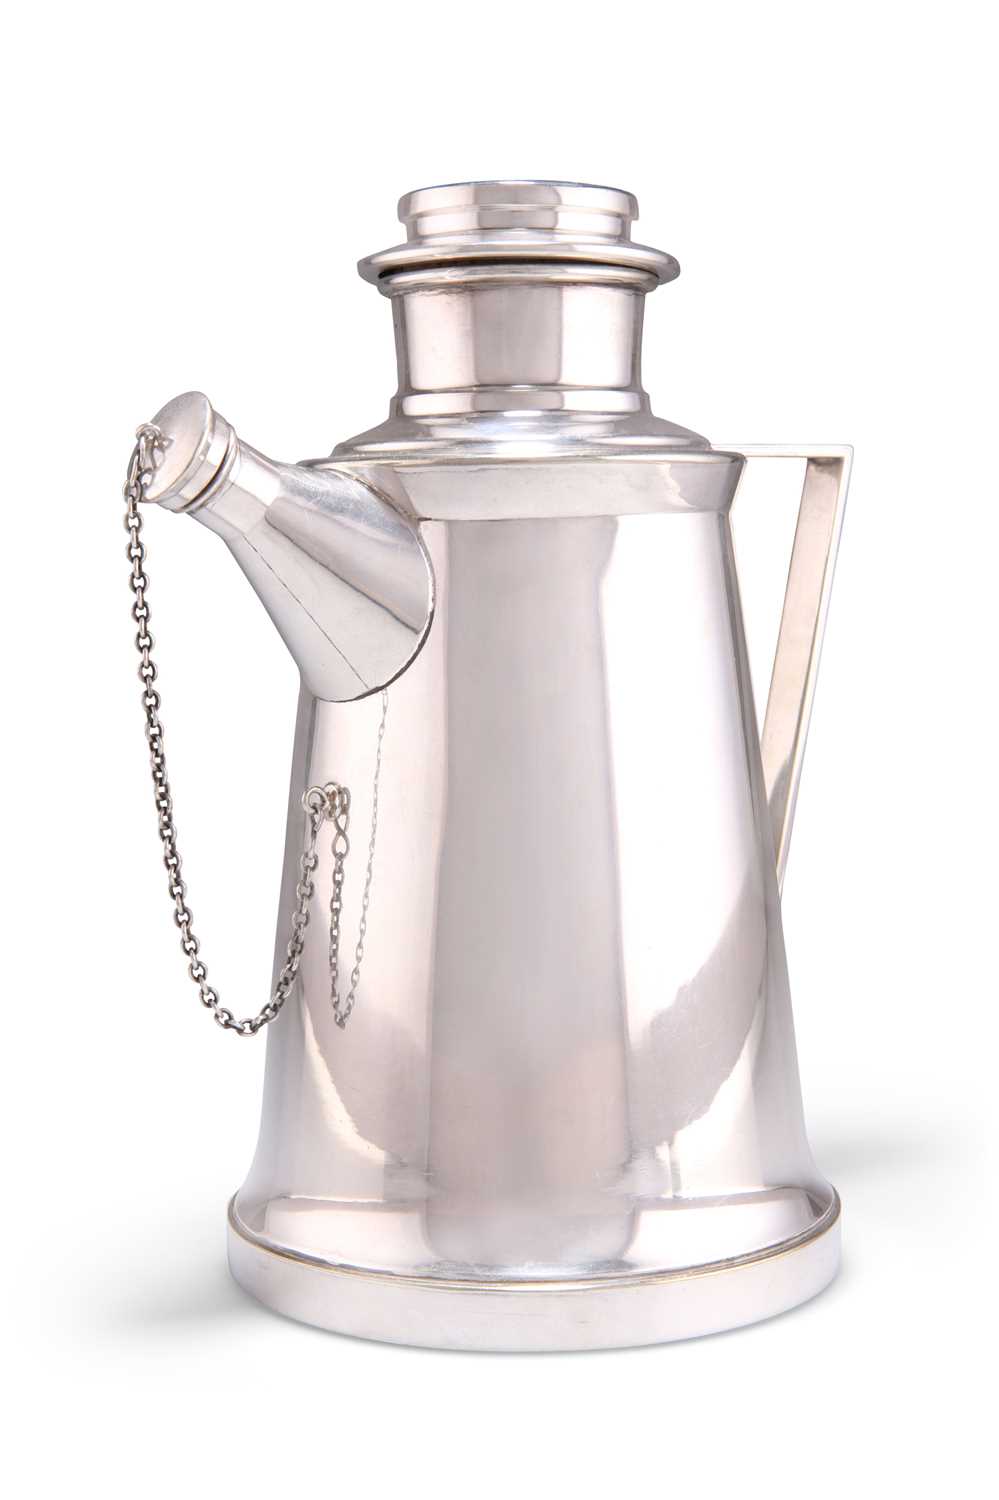 Lot 1007 - DUNHILL: AN ART DECO SILVER-PLATED MUSICAL COCKTAIL JUG